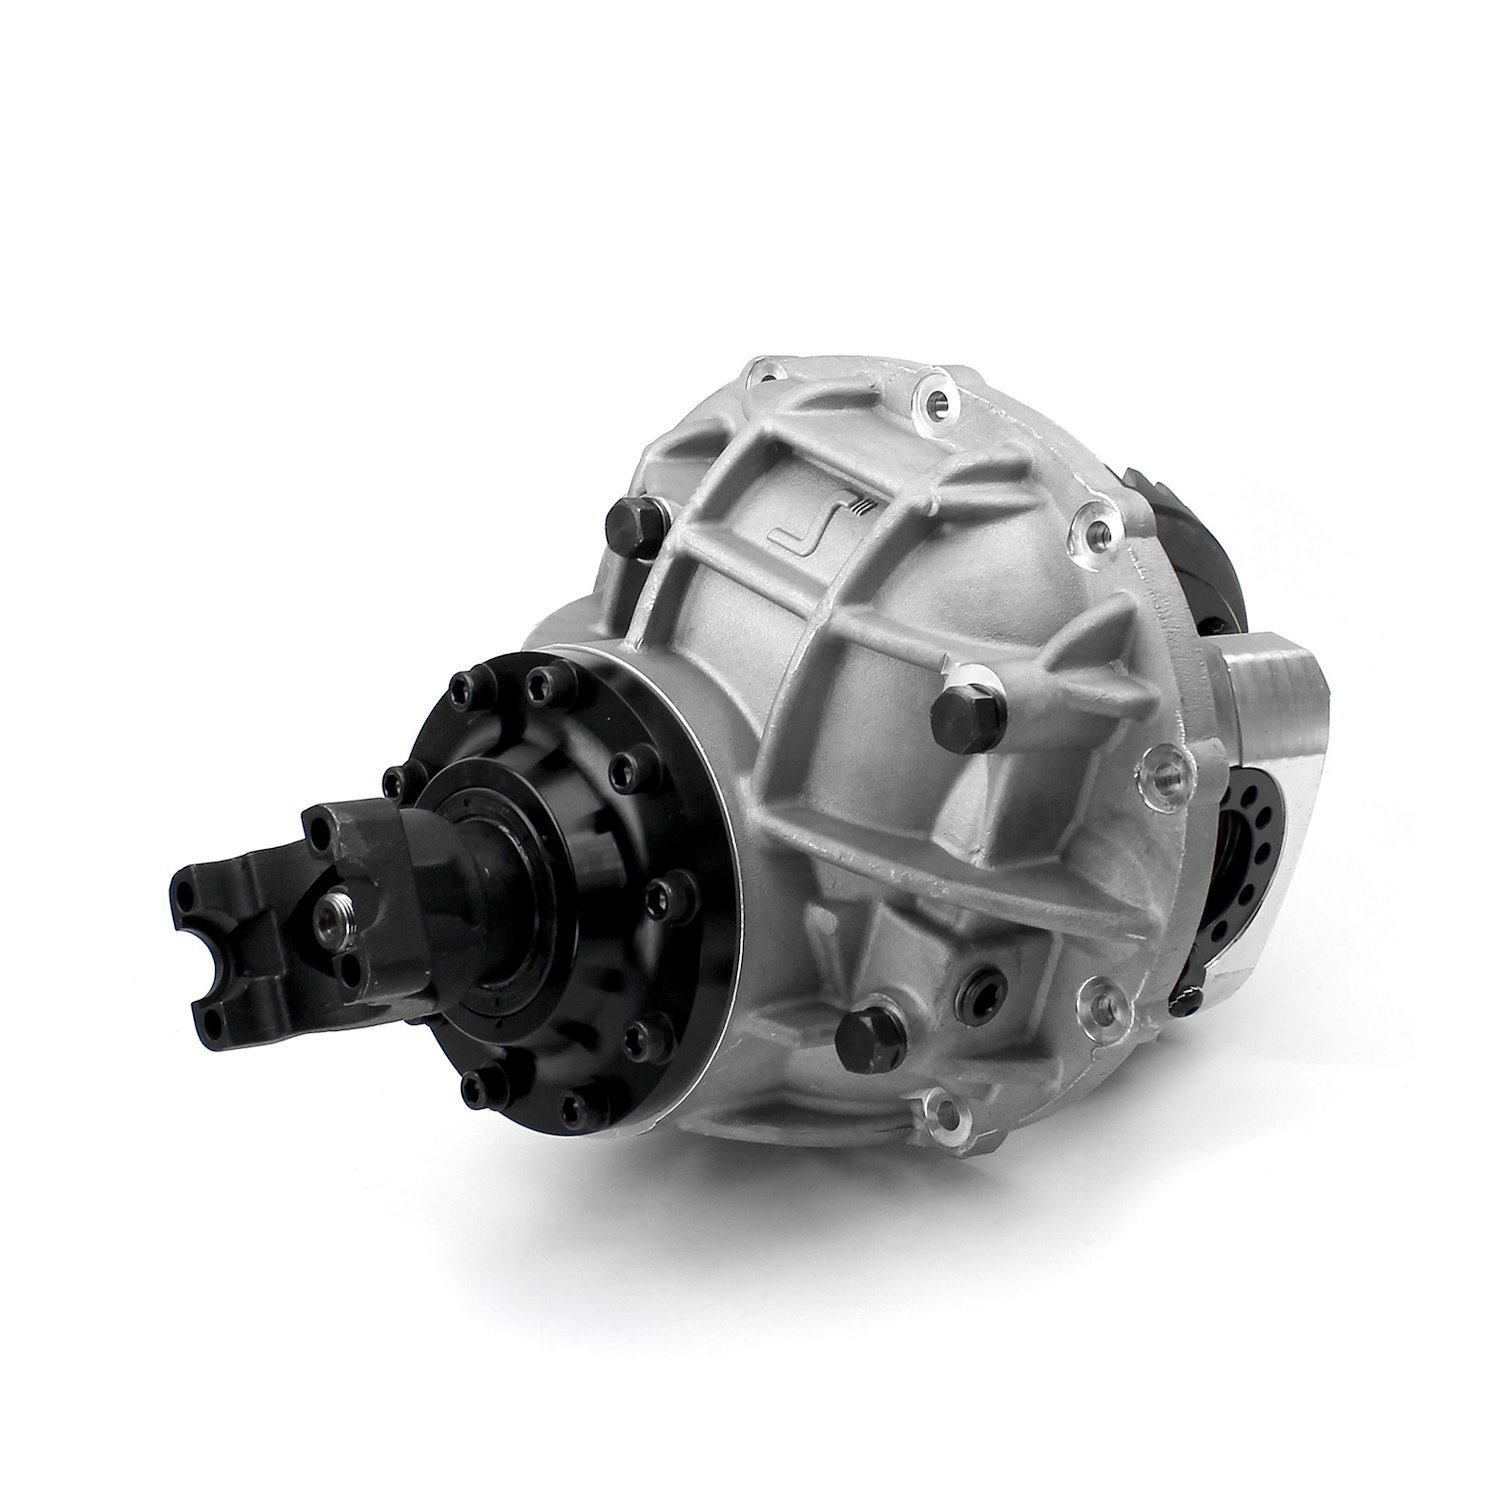 1-215-003-04 Ford 9-in. LSD TorqueWorm HD Complete Third Member Assembly - 31 Spline [3.70:1 Ratio]